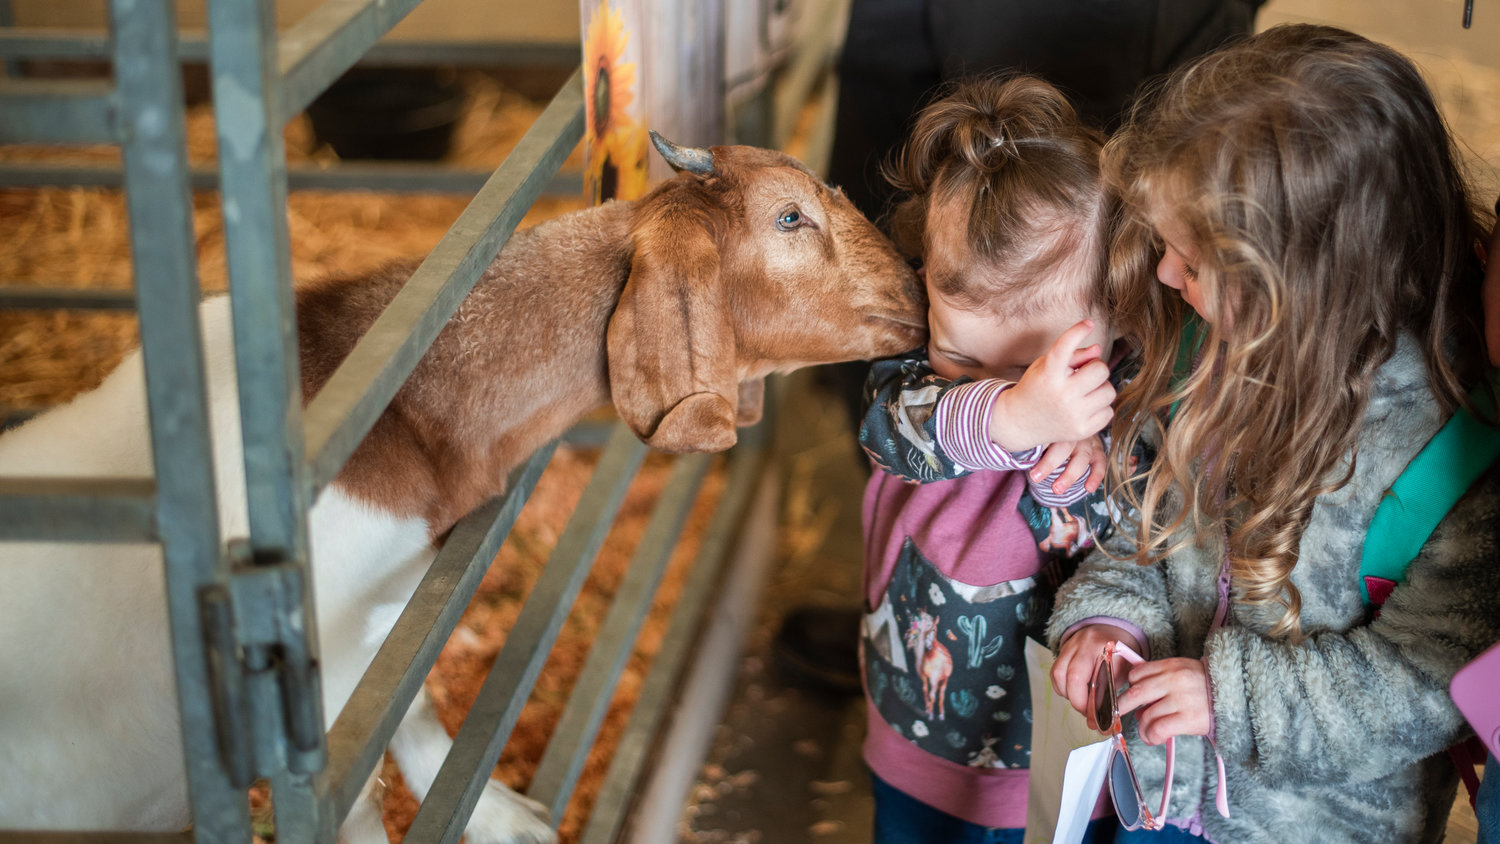 Adalynn, 2, and Nora, 4, are nudged by a young goat at the Blue Pavilion before the opening of the Spring Youth Fair on Friday afternoon.